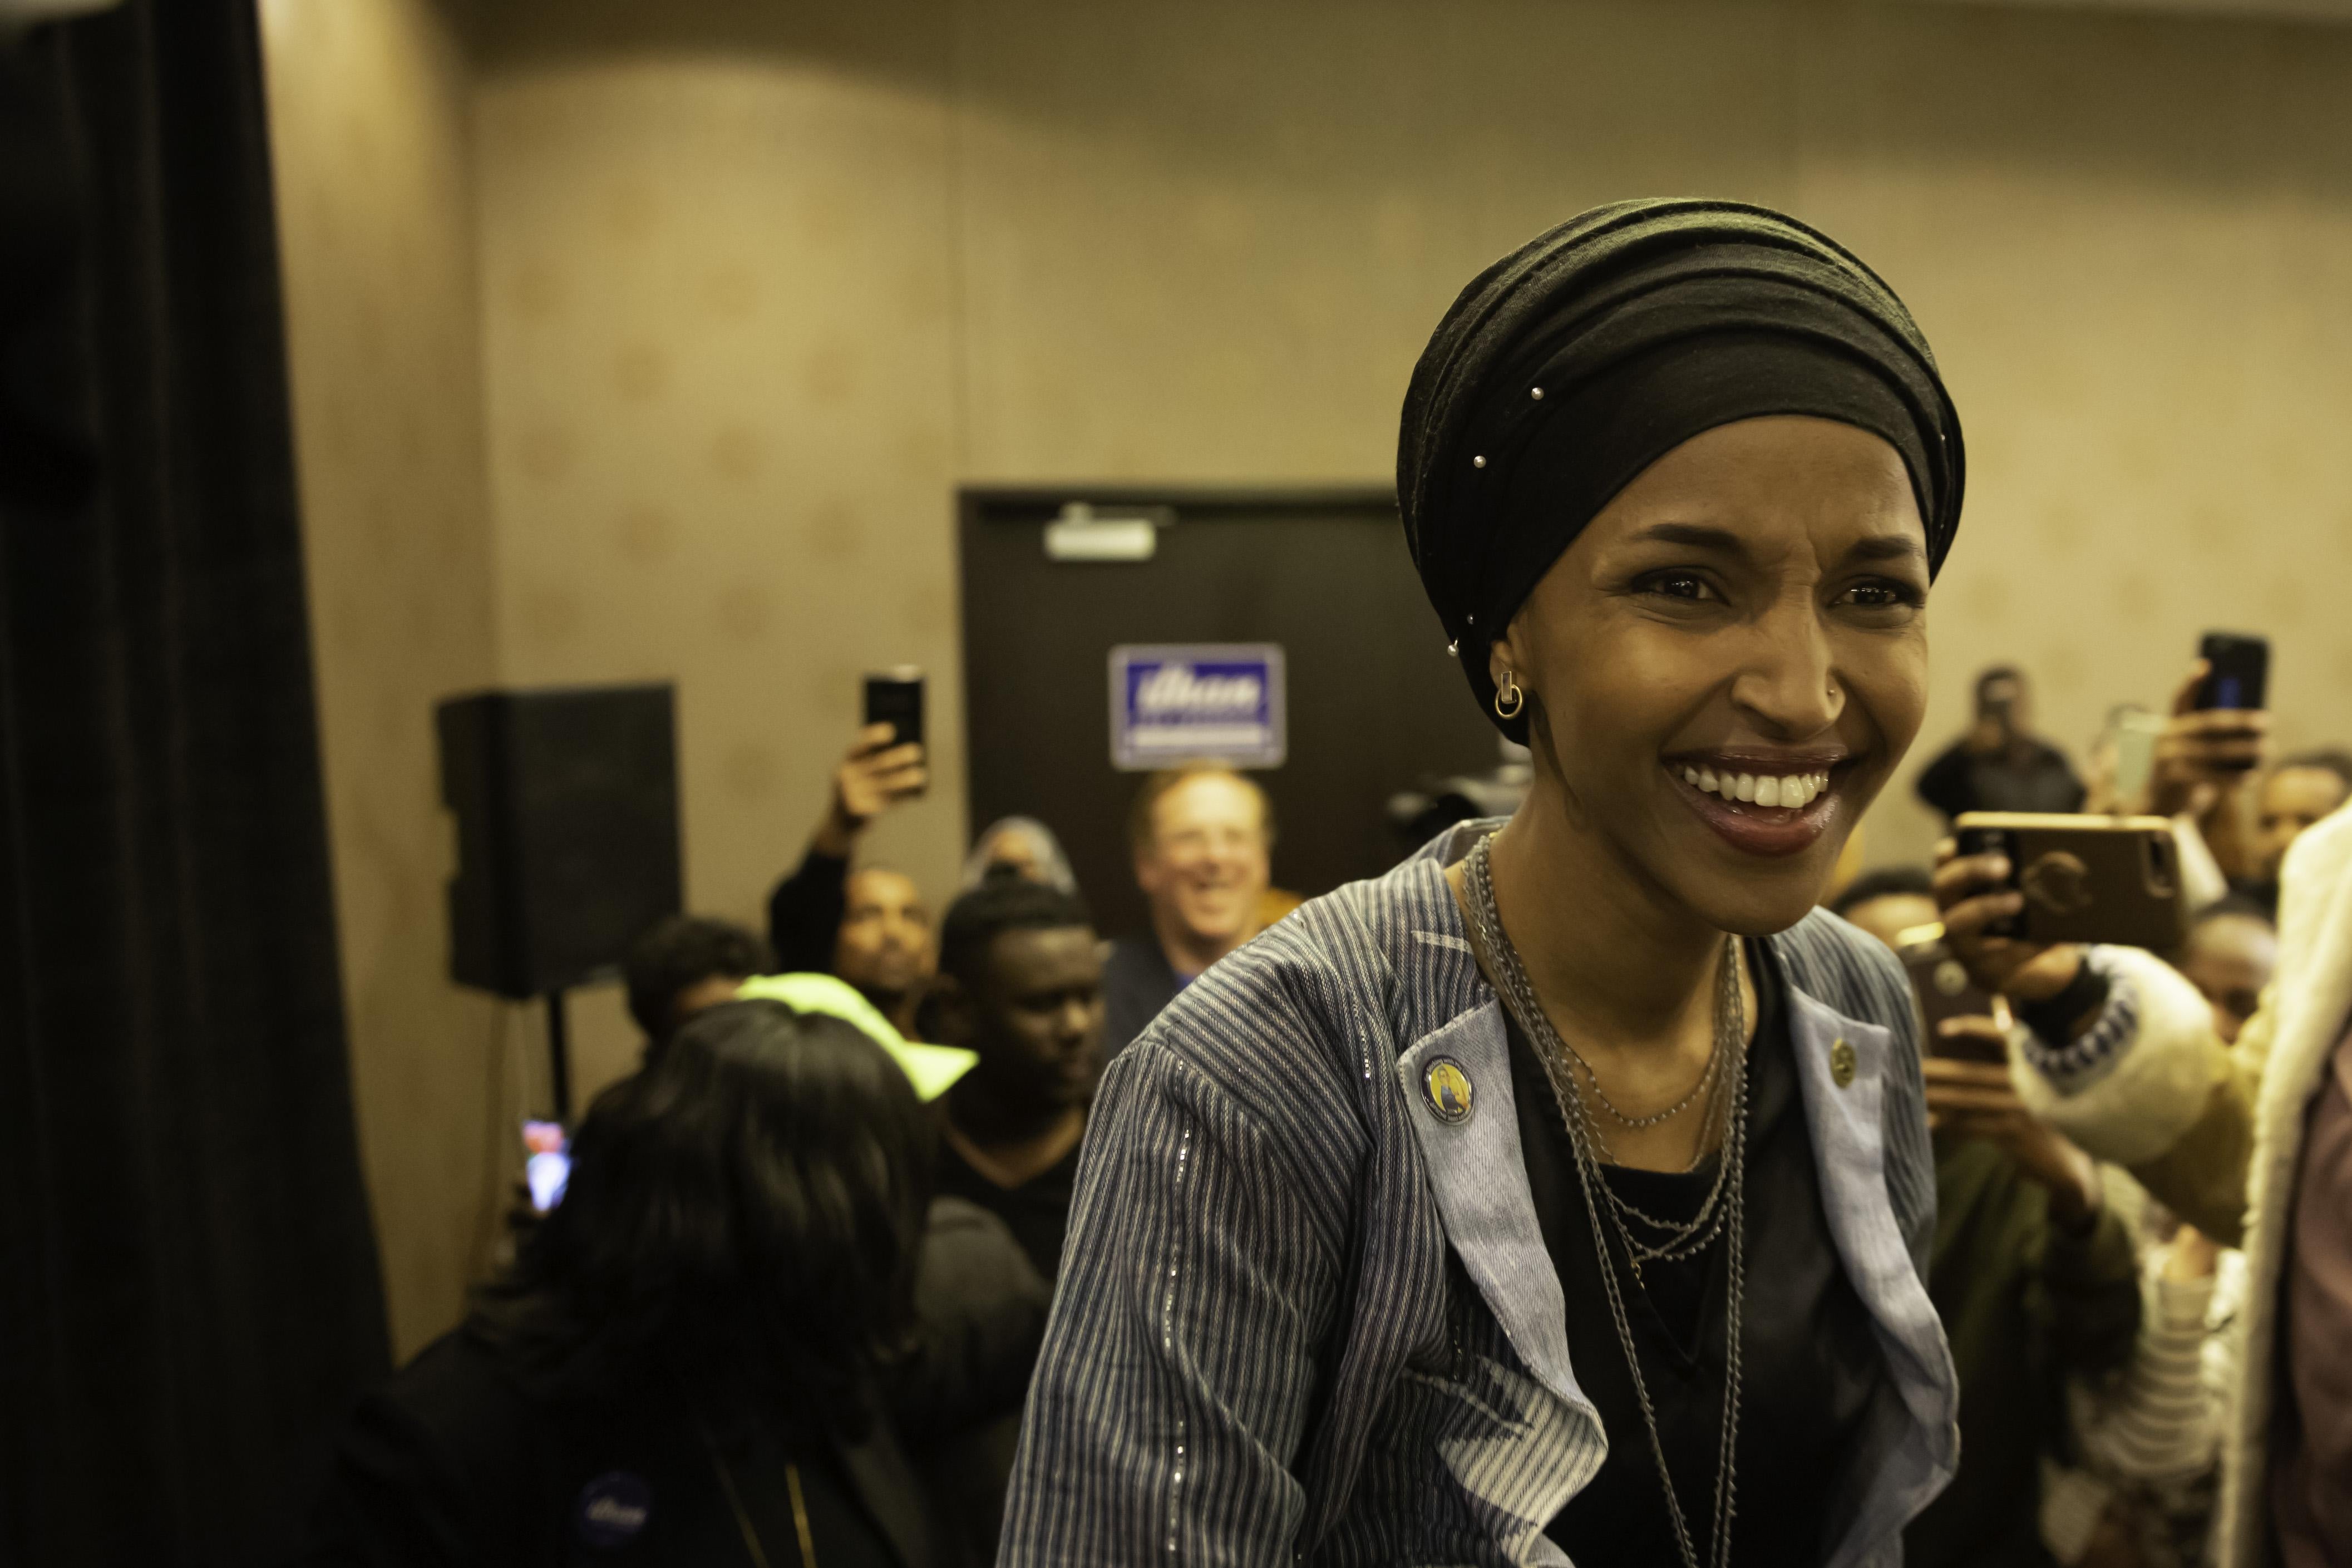 Ilhan Omar smiling, with a crowd behind her.